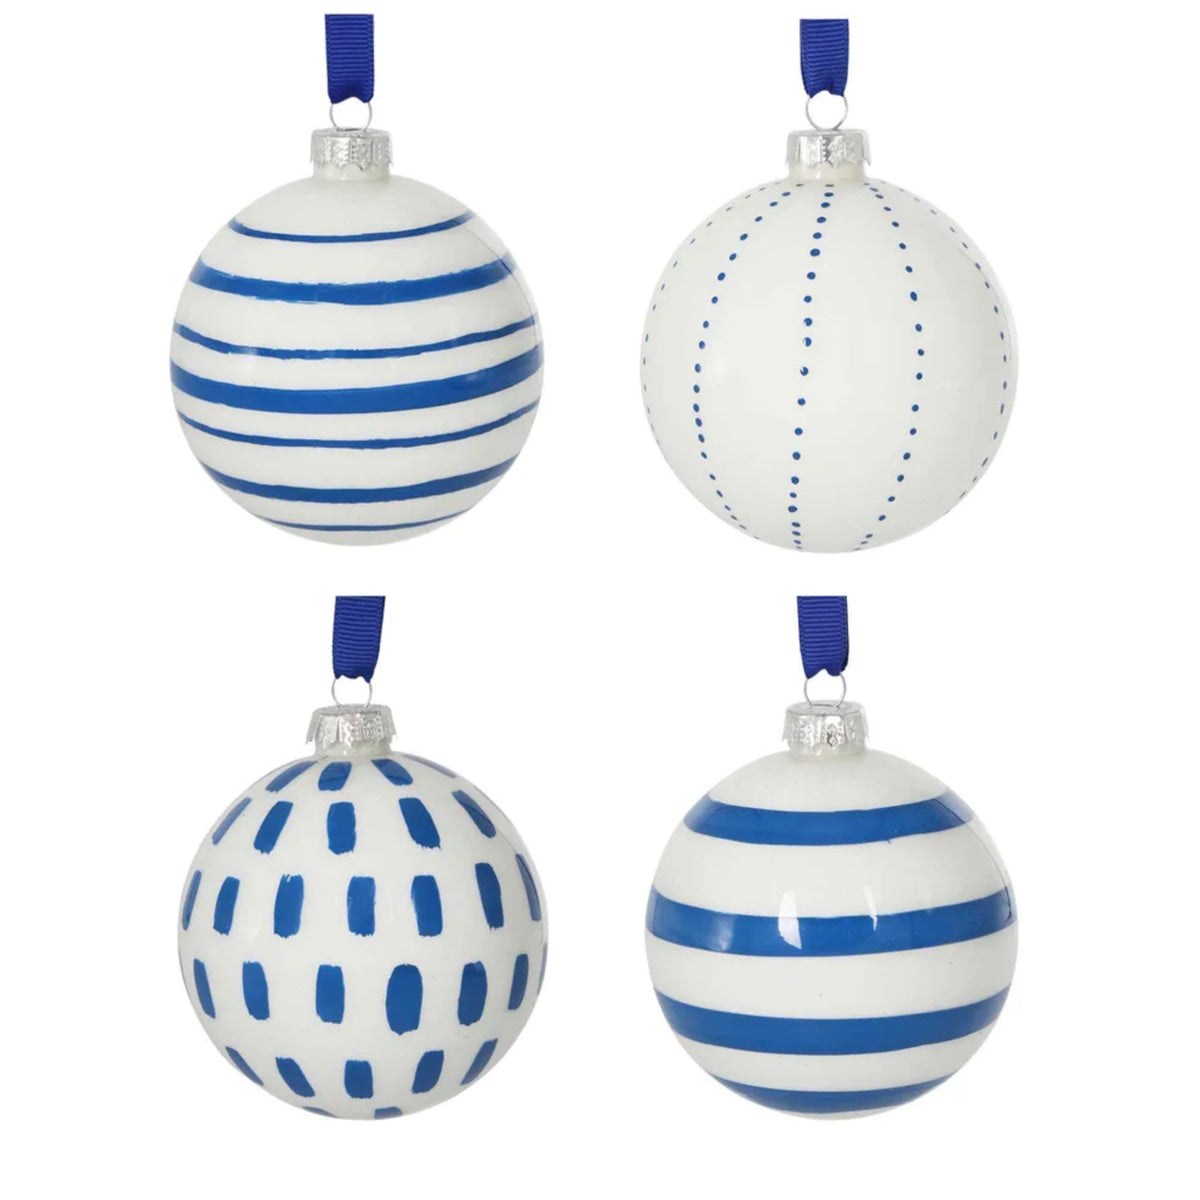 Box of 4 Baubles - My Christmas